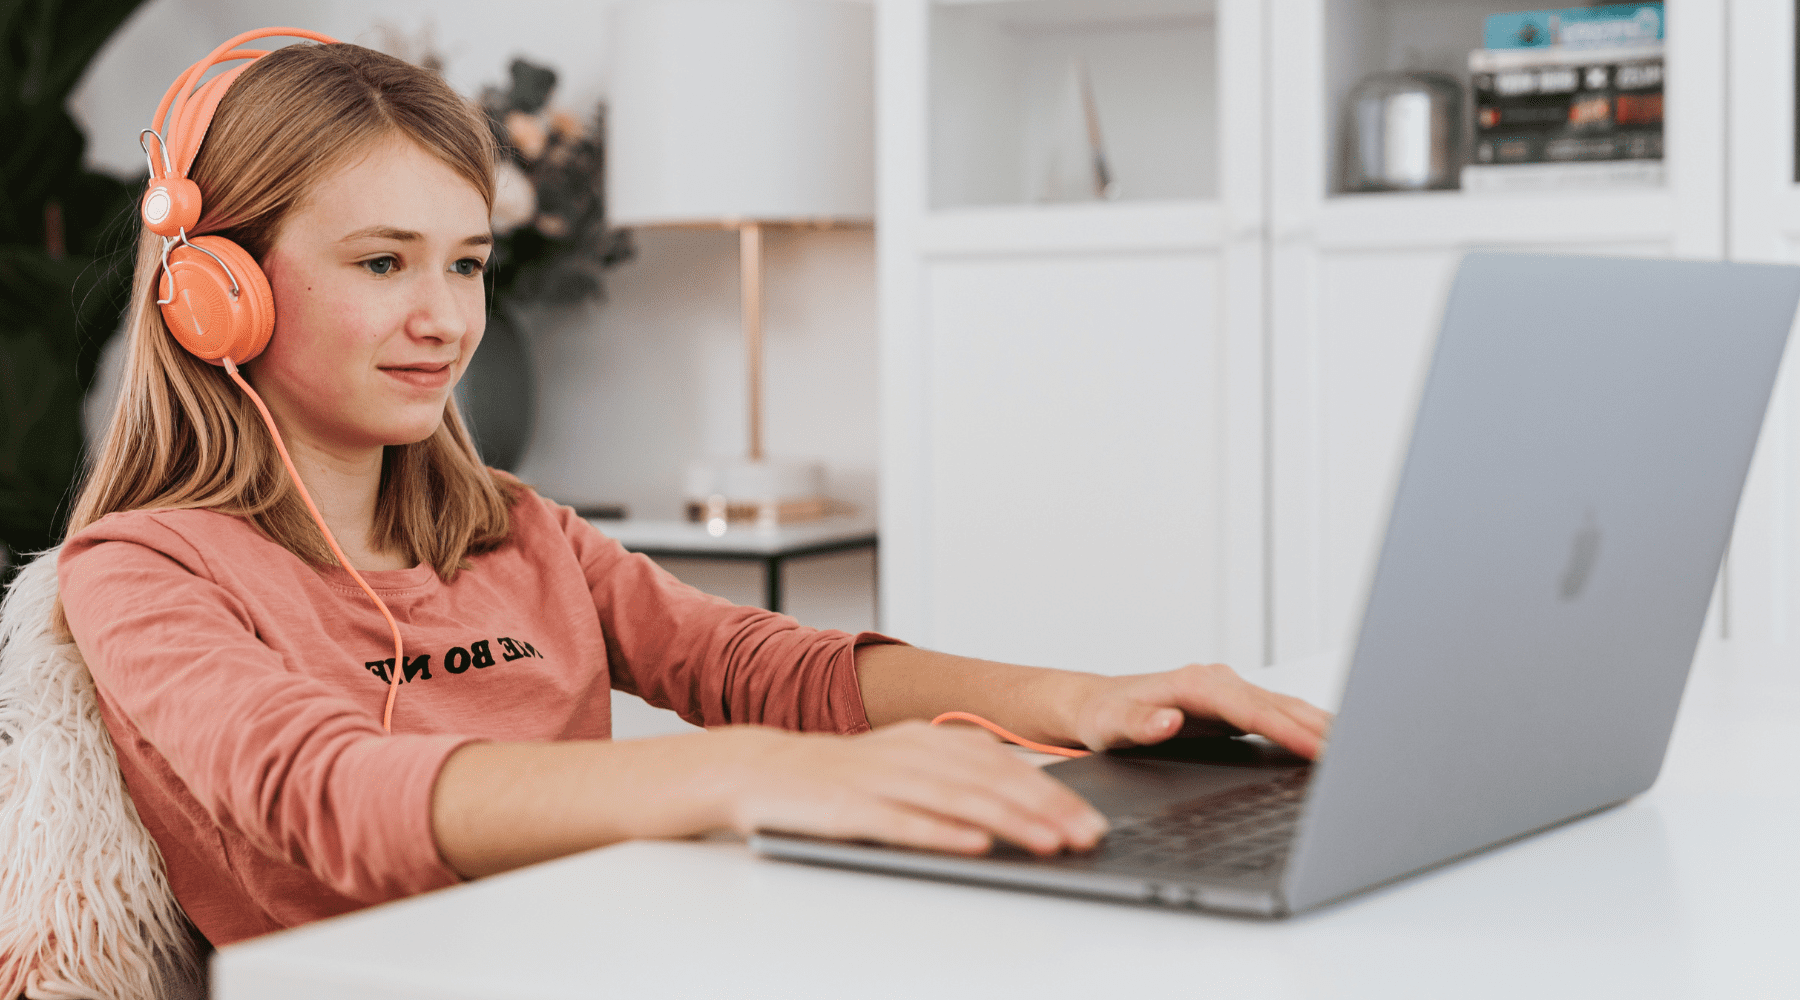 Female student attending online class or online tutoring session.